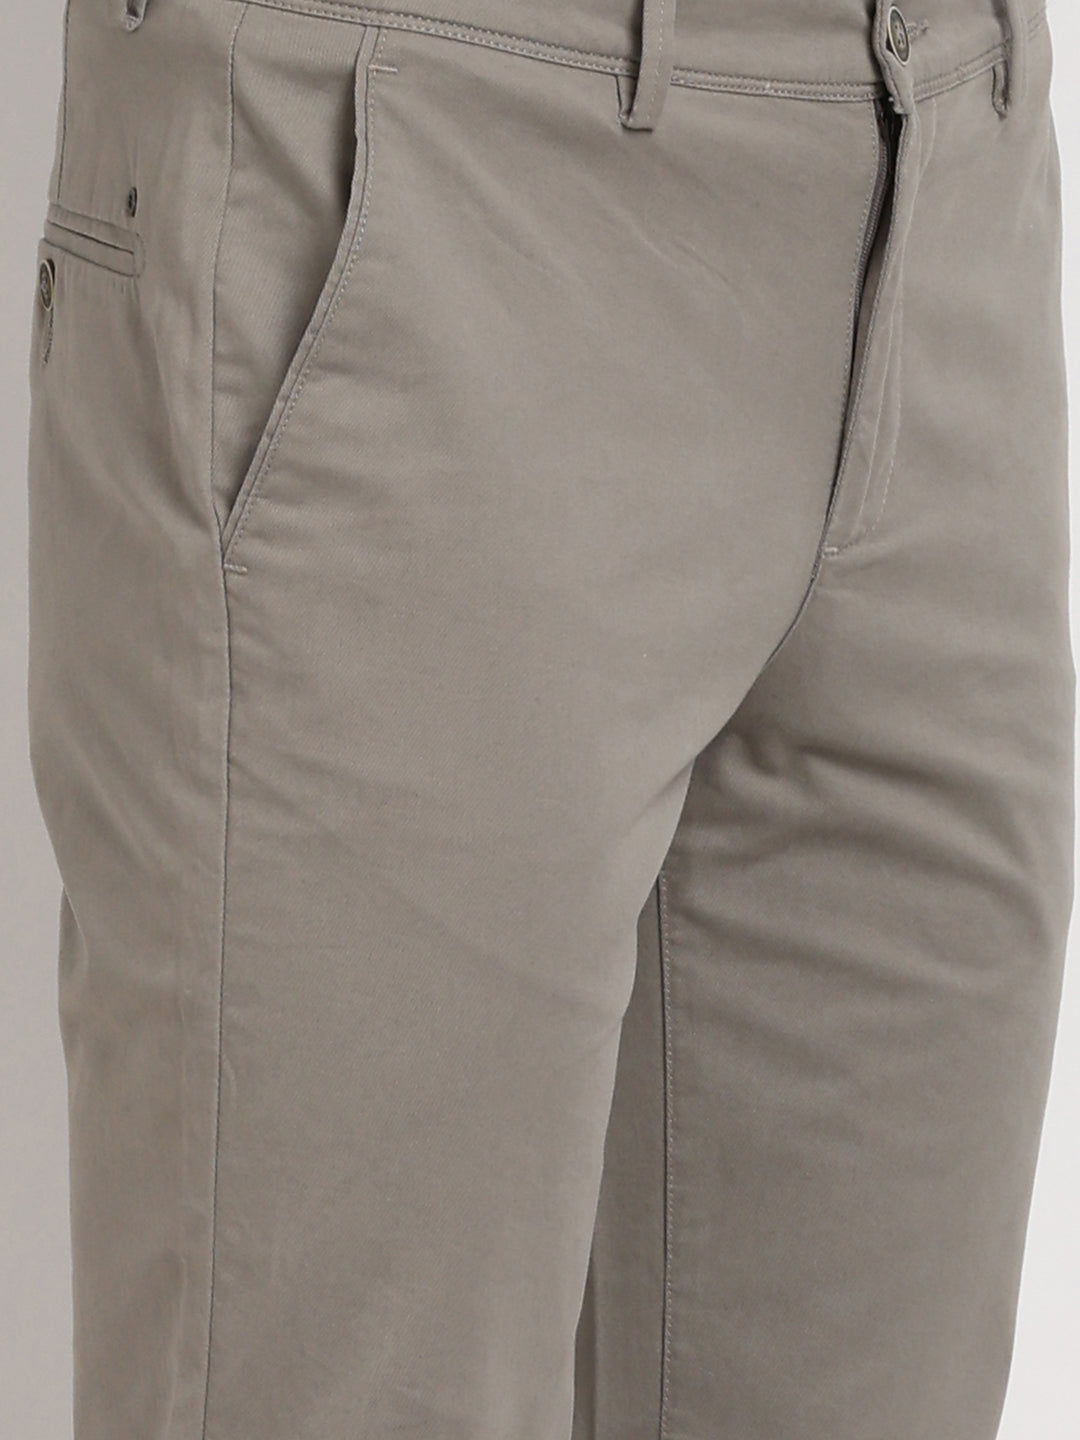 Cotton Stretch Light Grey Plain Ultra Slim Fit Flat Front Casual Trouser